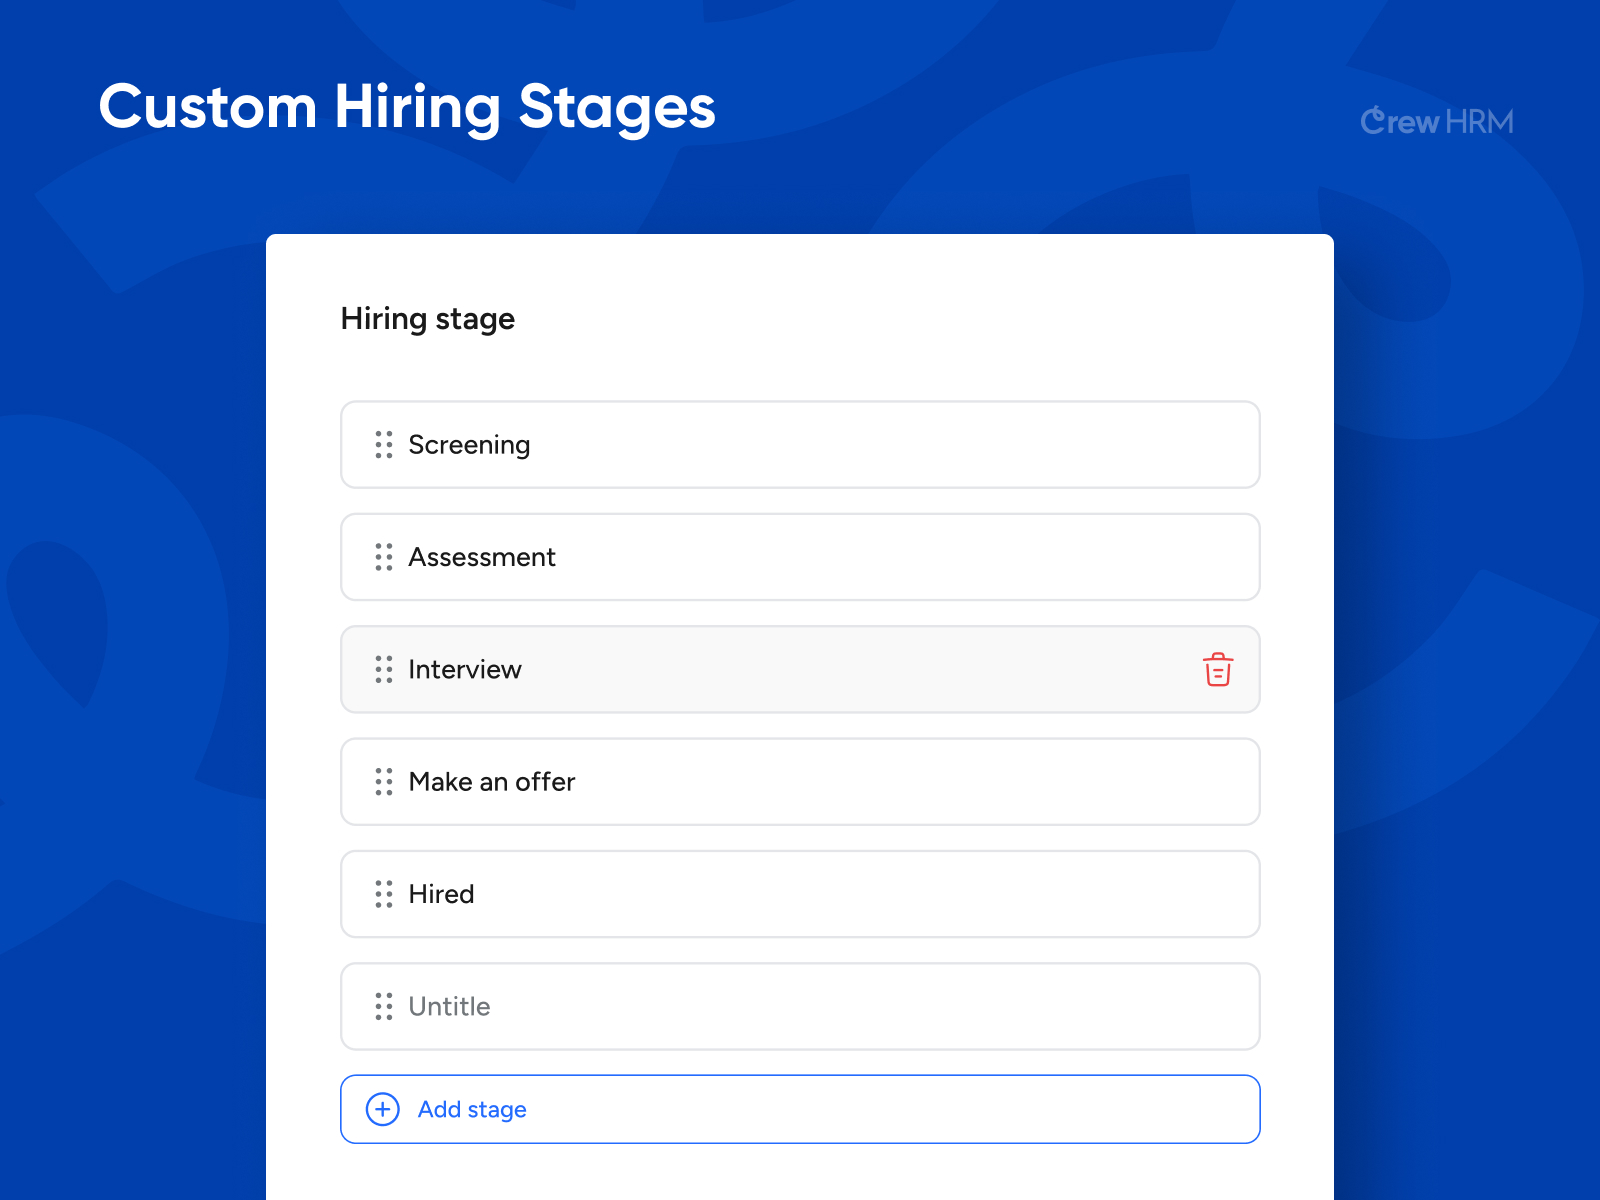 Customize the hiring stages as you please.